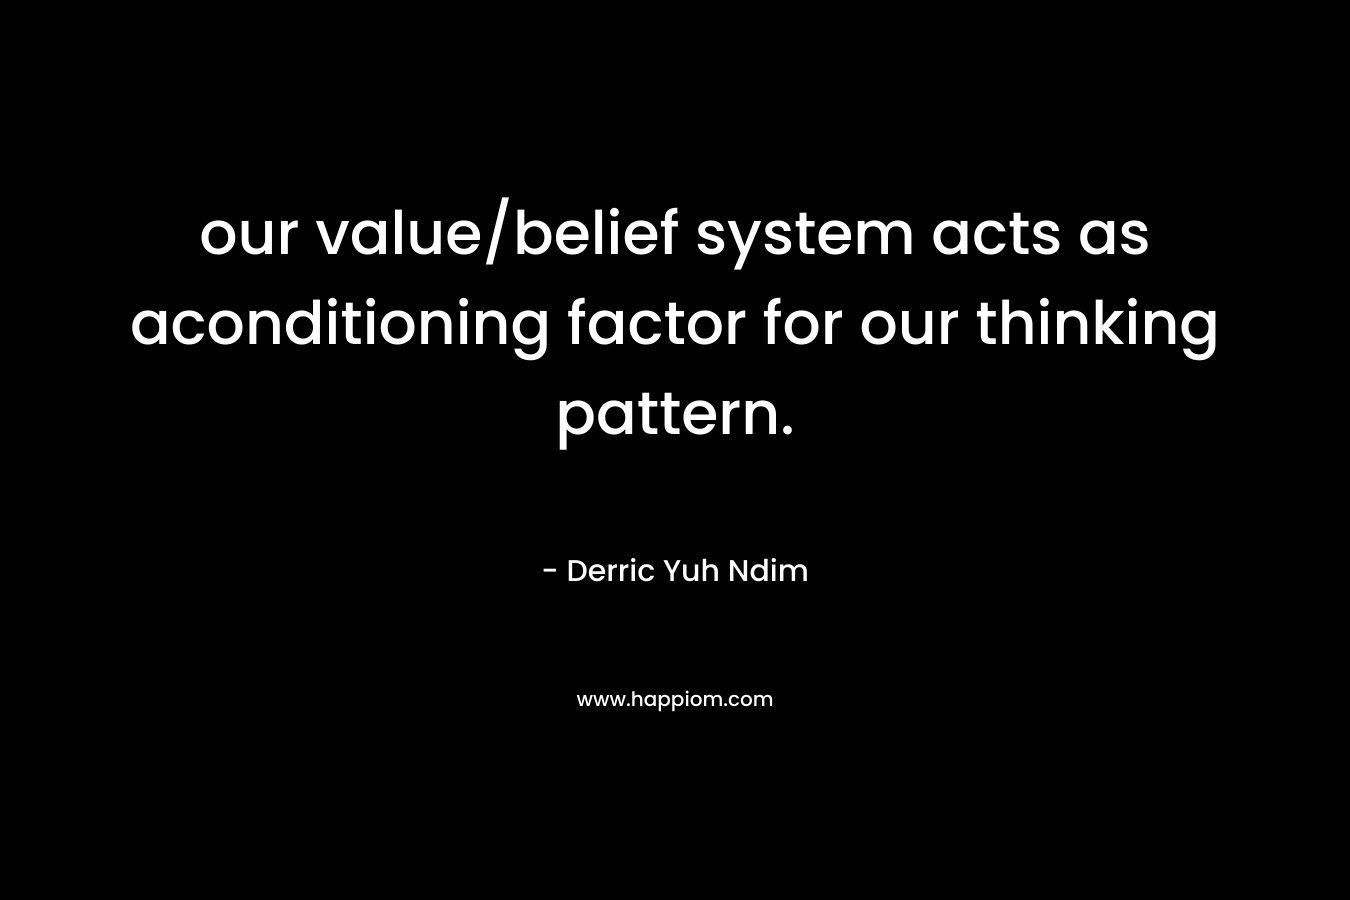 our value/belief system acts as aconditioning factor for our thinking pattern.